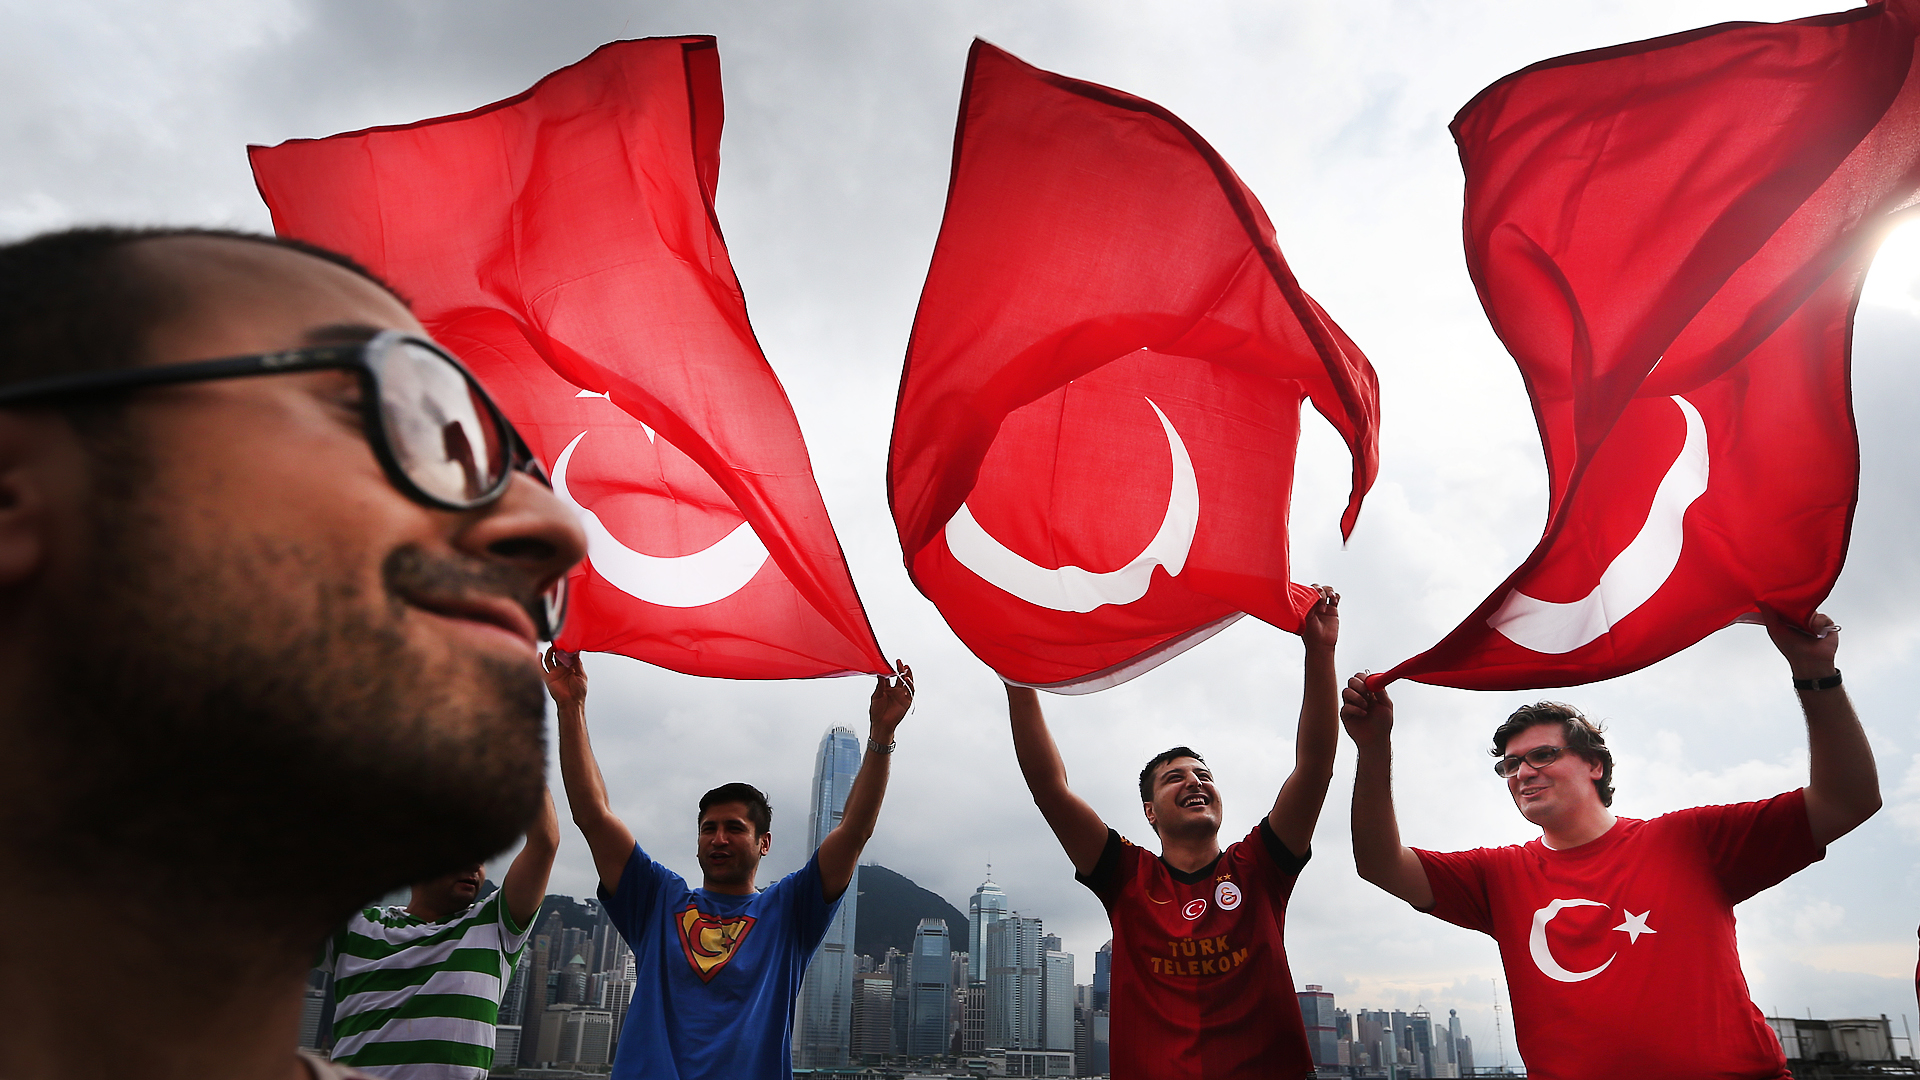 Turkish expats living in Hong Kong gather for a peaceful protest at the clock tower in Tsim Sha Tsui in support of protests in Istanbul against a public park being turned into a shopping mall in 2013. Photo: Sam Tsang